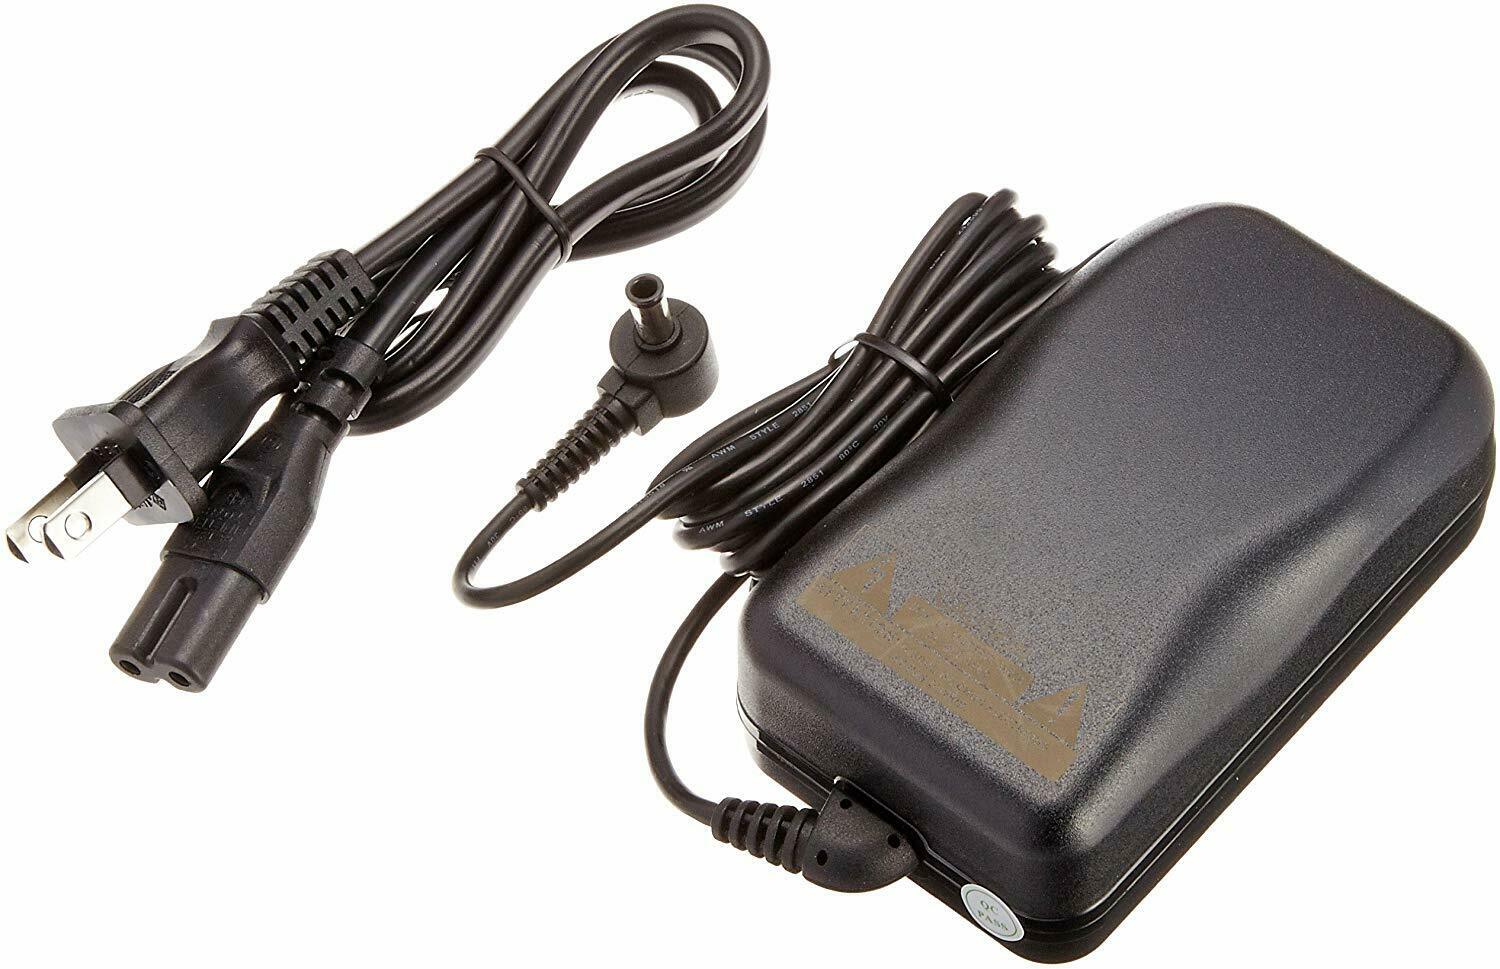 5.5mmx2.1mm/2.5mm Replacement for 12V 2.0A AC ADAPTER Model TDX-1202000 Power Supply UK Plug Model: 12V2ACDM9D MPN: O4-